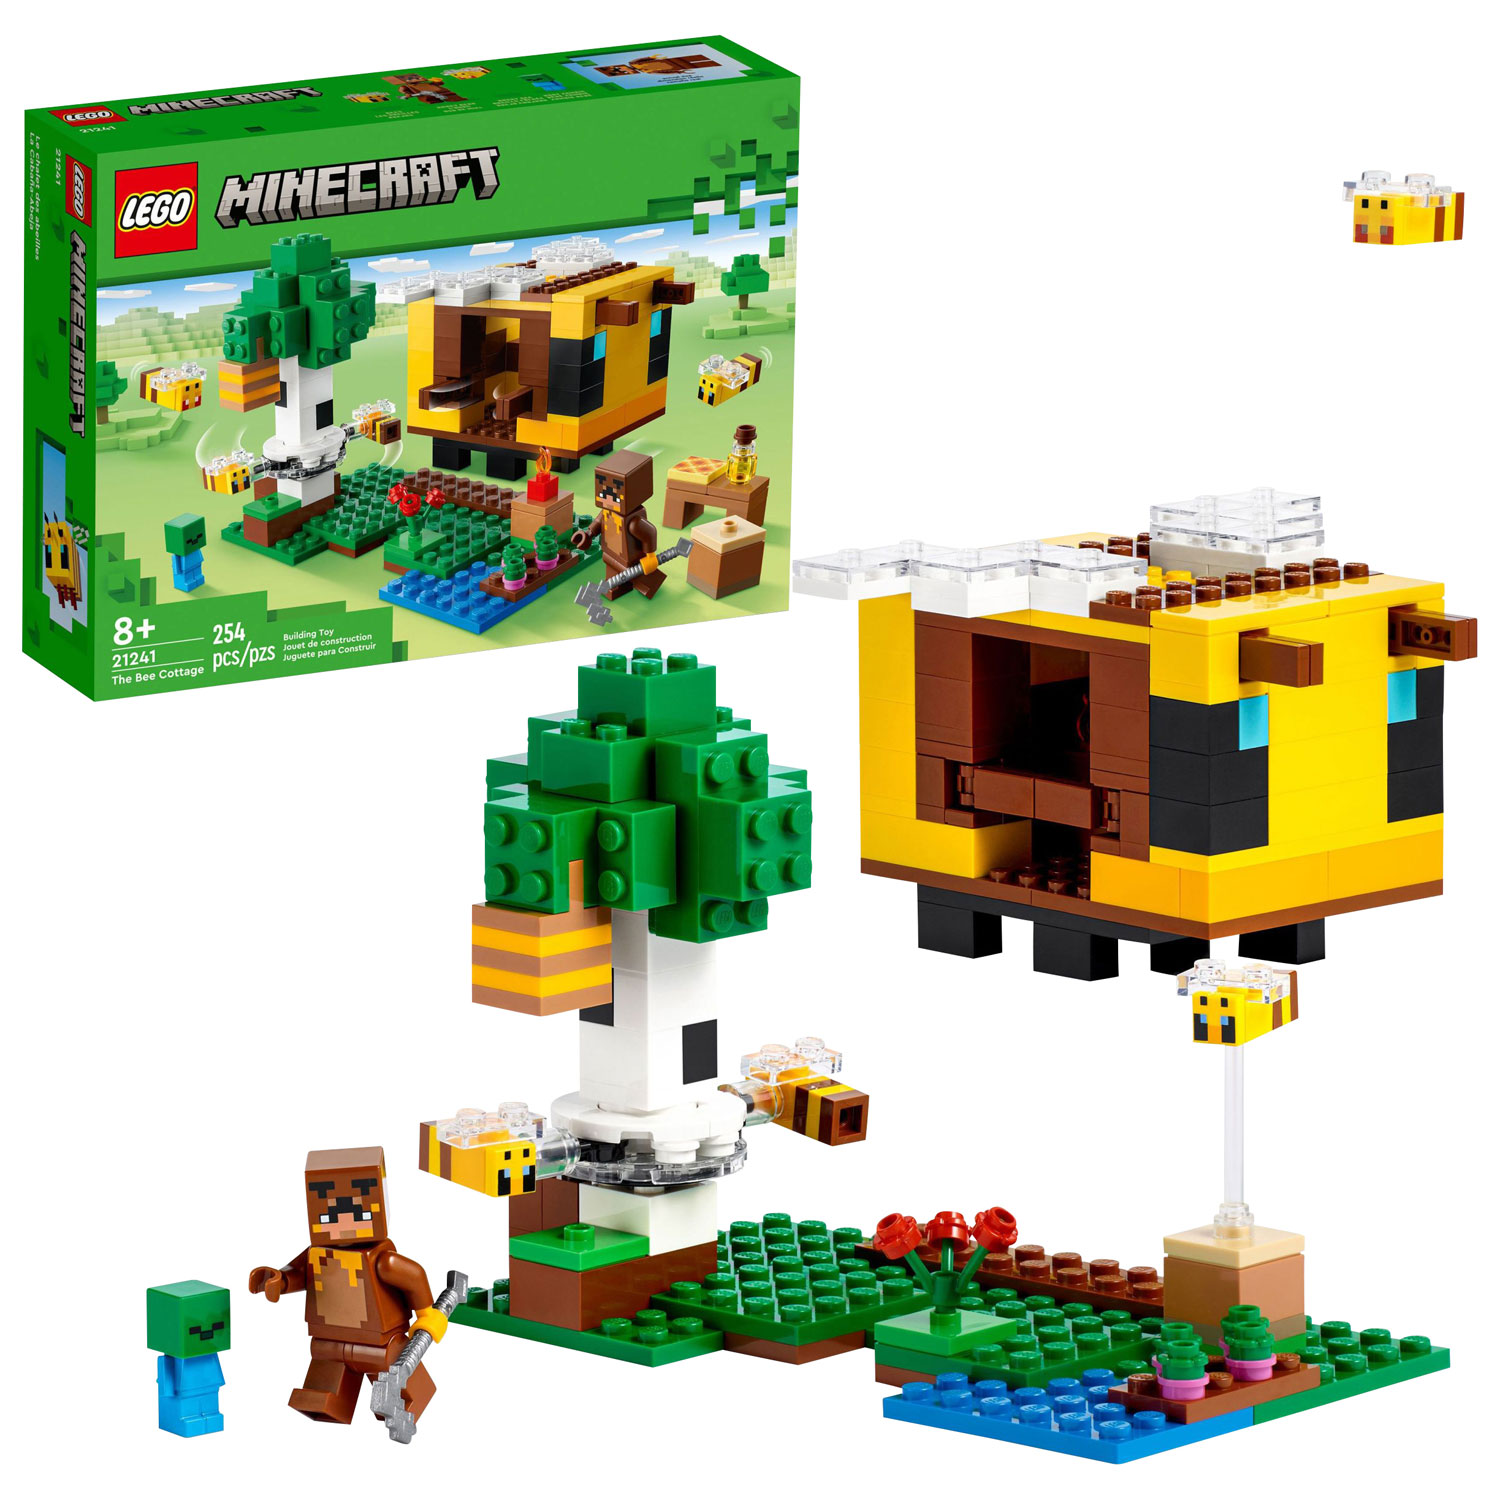 LEGO Minecraft: The Bee Cottage - 254 Pieces (21241)